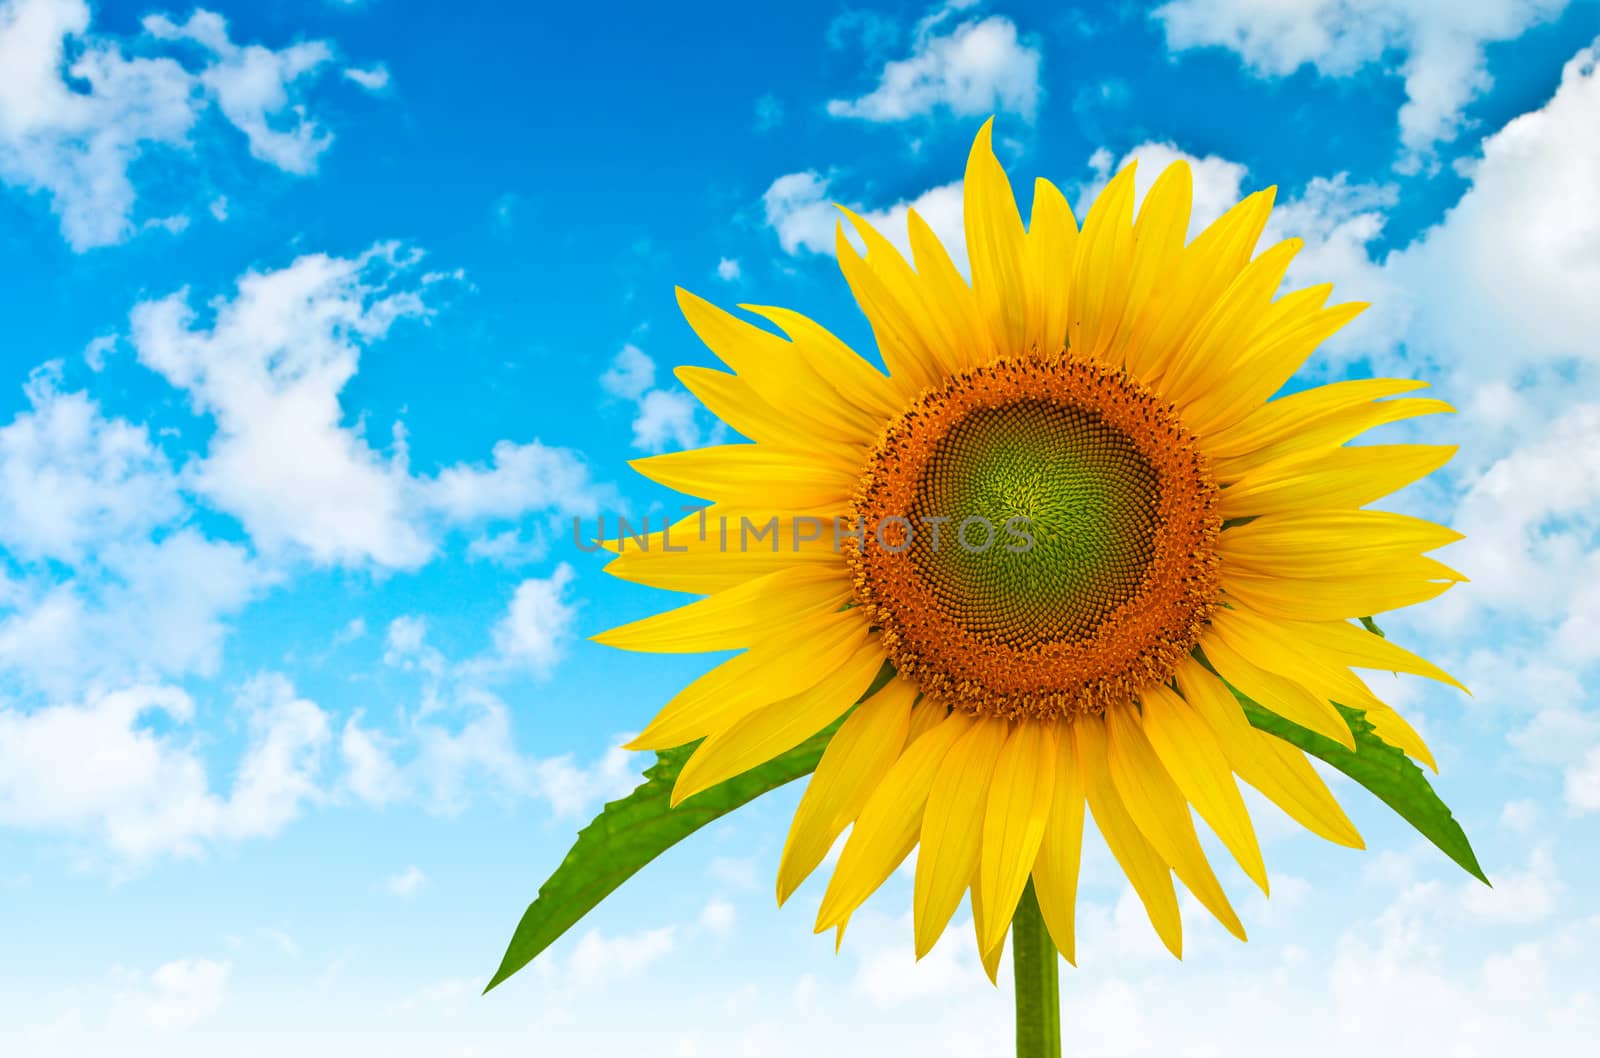 sunflower on a background of blue cloudy sky